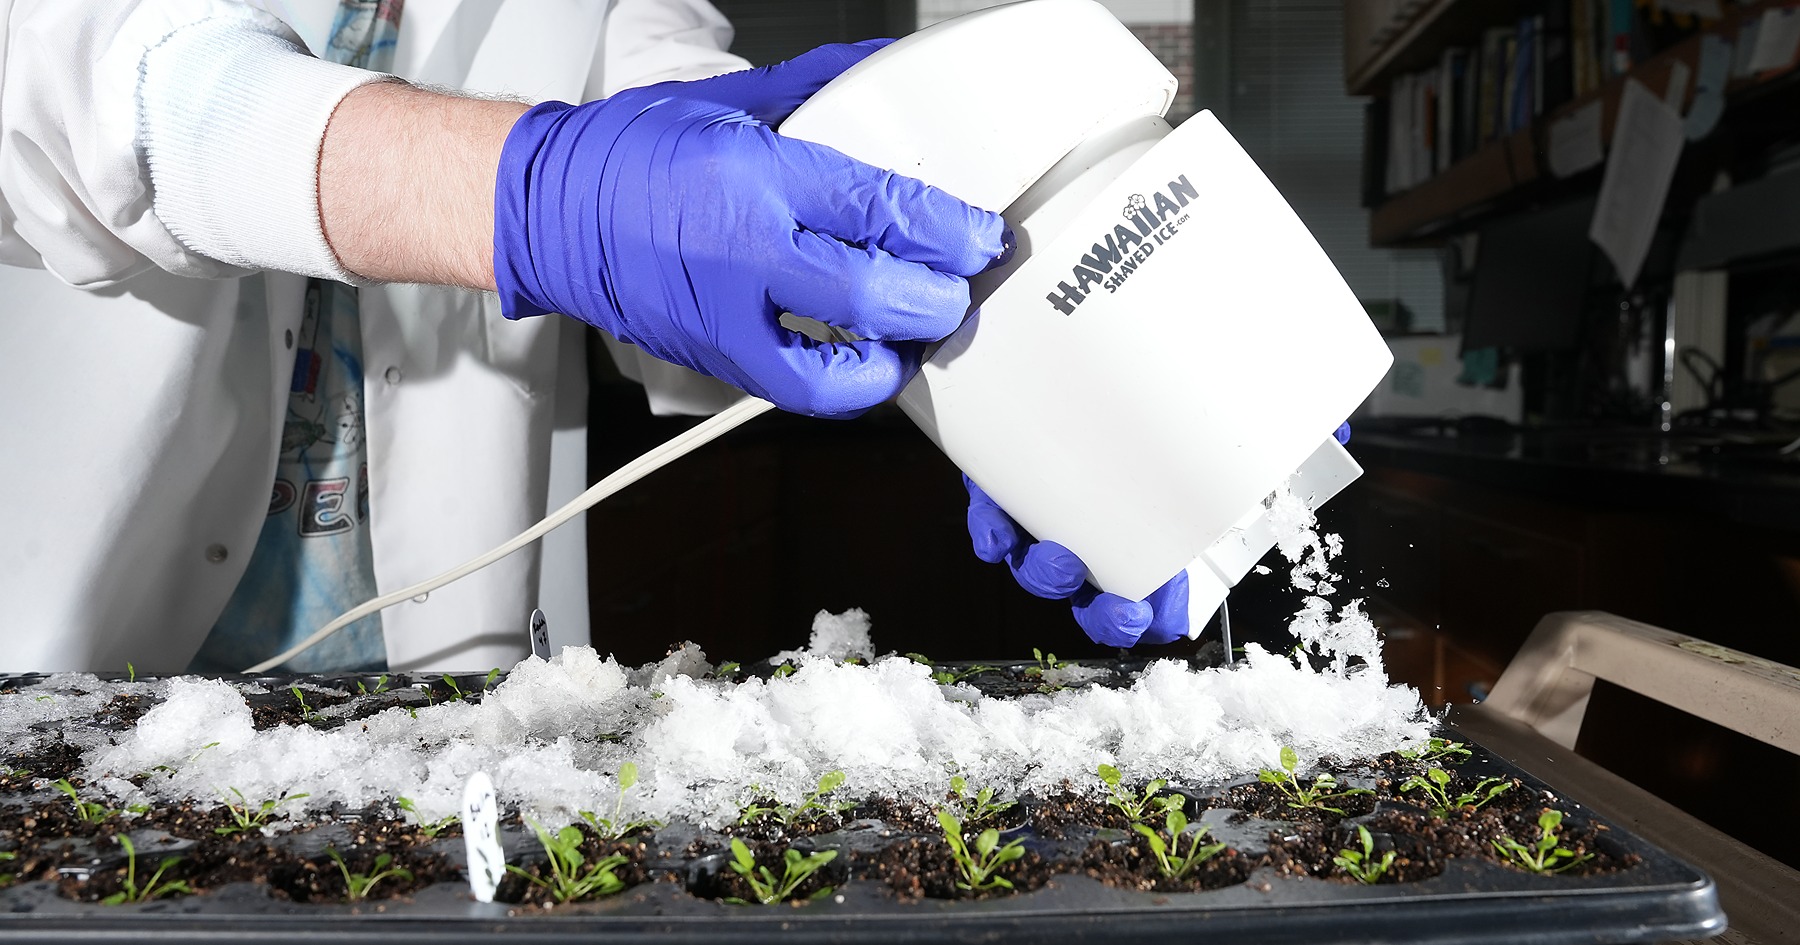 A shaved ice machine sprinkles snow over young arabidopsis plants to freeze the whole plant at once.